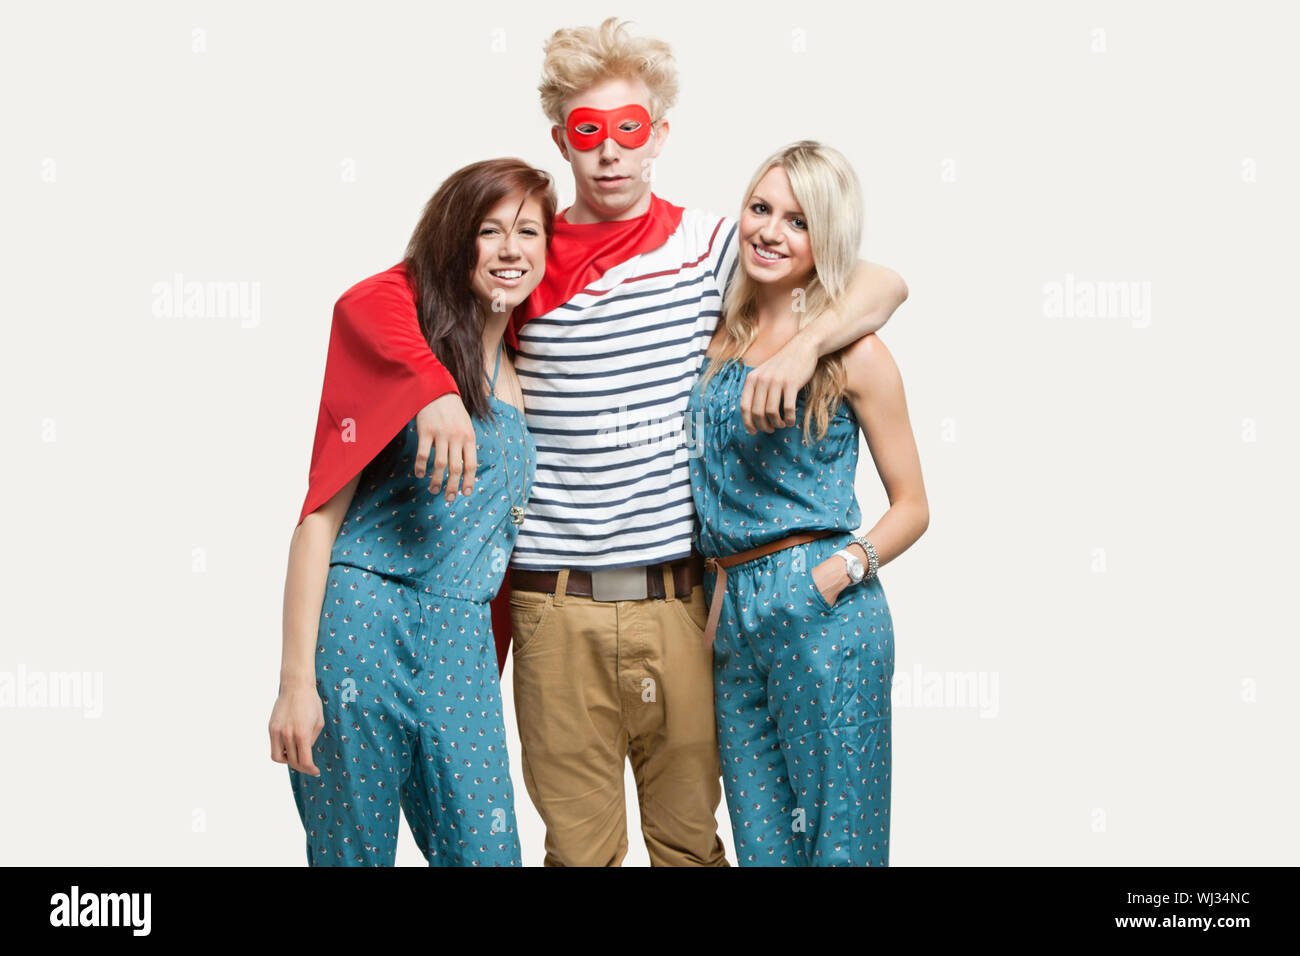 Portrait of young man in superhero costume and women wearing jumpsuits standing together against gray background Stock Photo